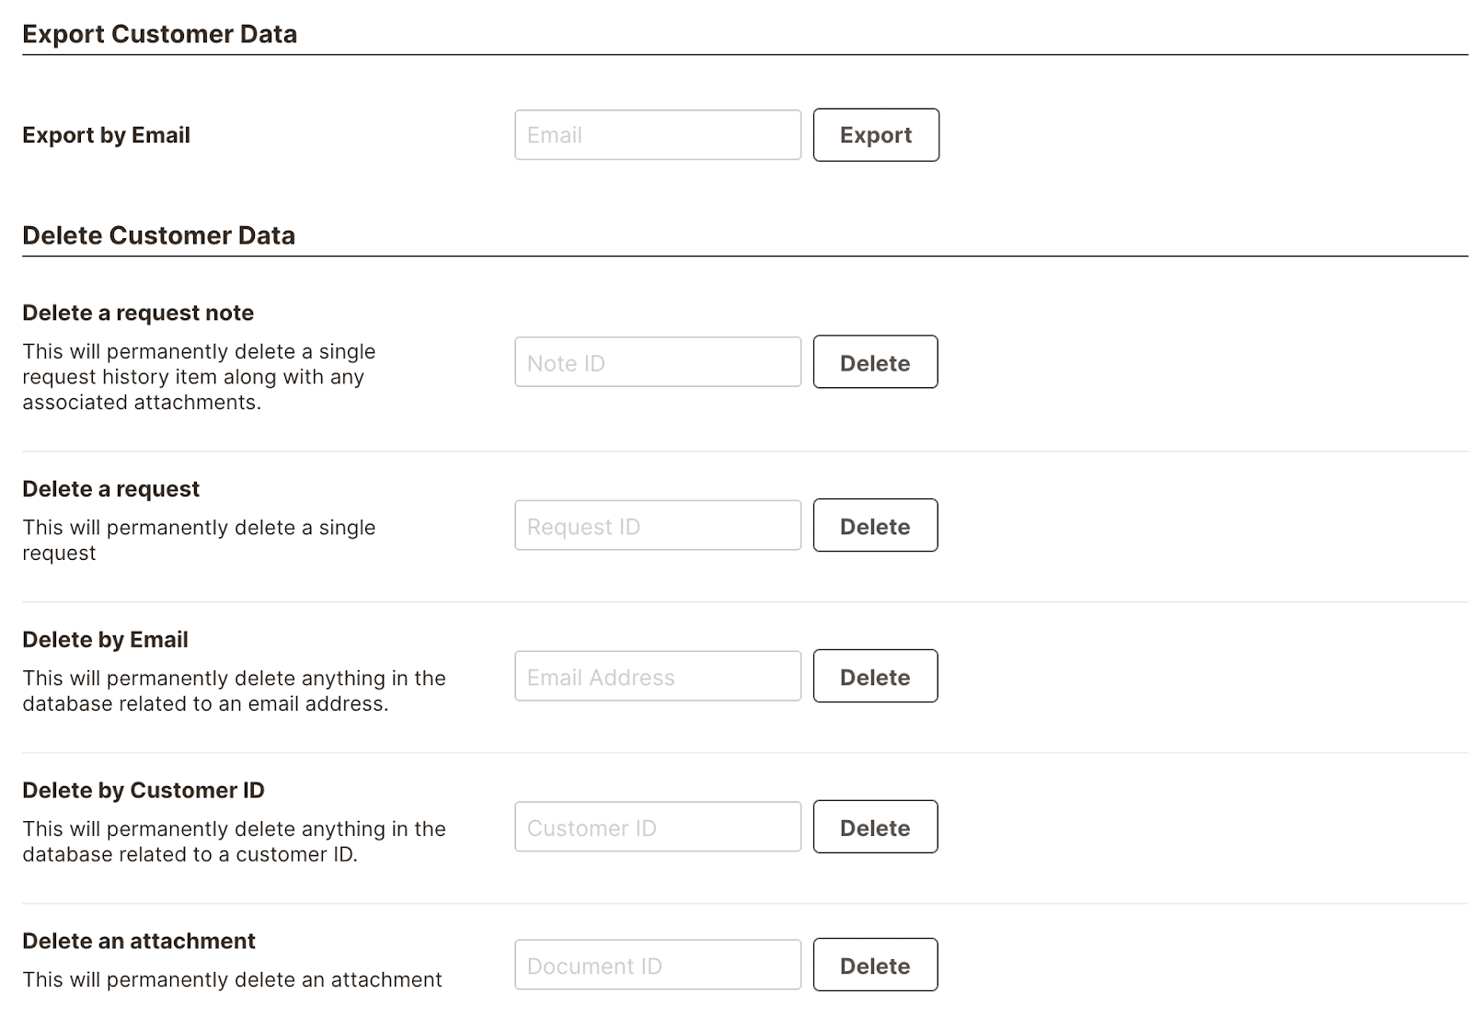 Export Customer Data by Email, or Delete Customer Data.